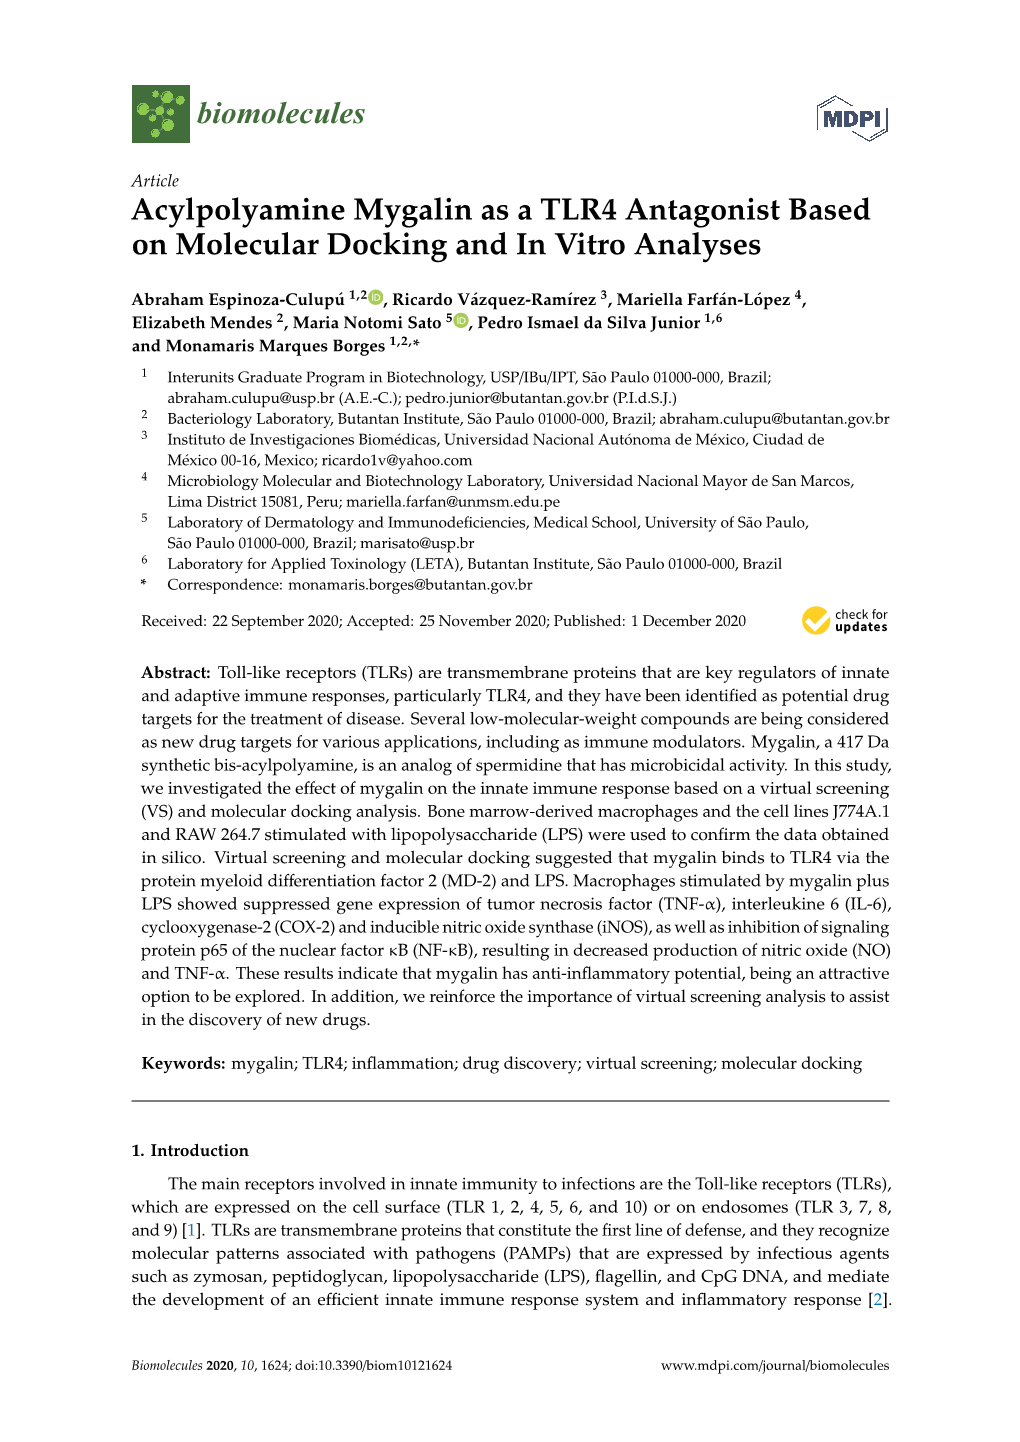 Acylpolyamine Mygalin As a TLR4 Antagonist Based on Molecular Docking and in Vitro Analyses